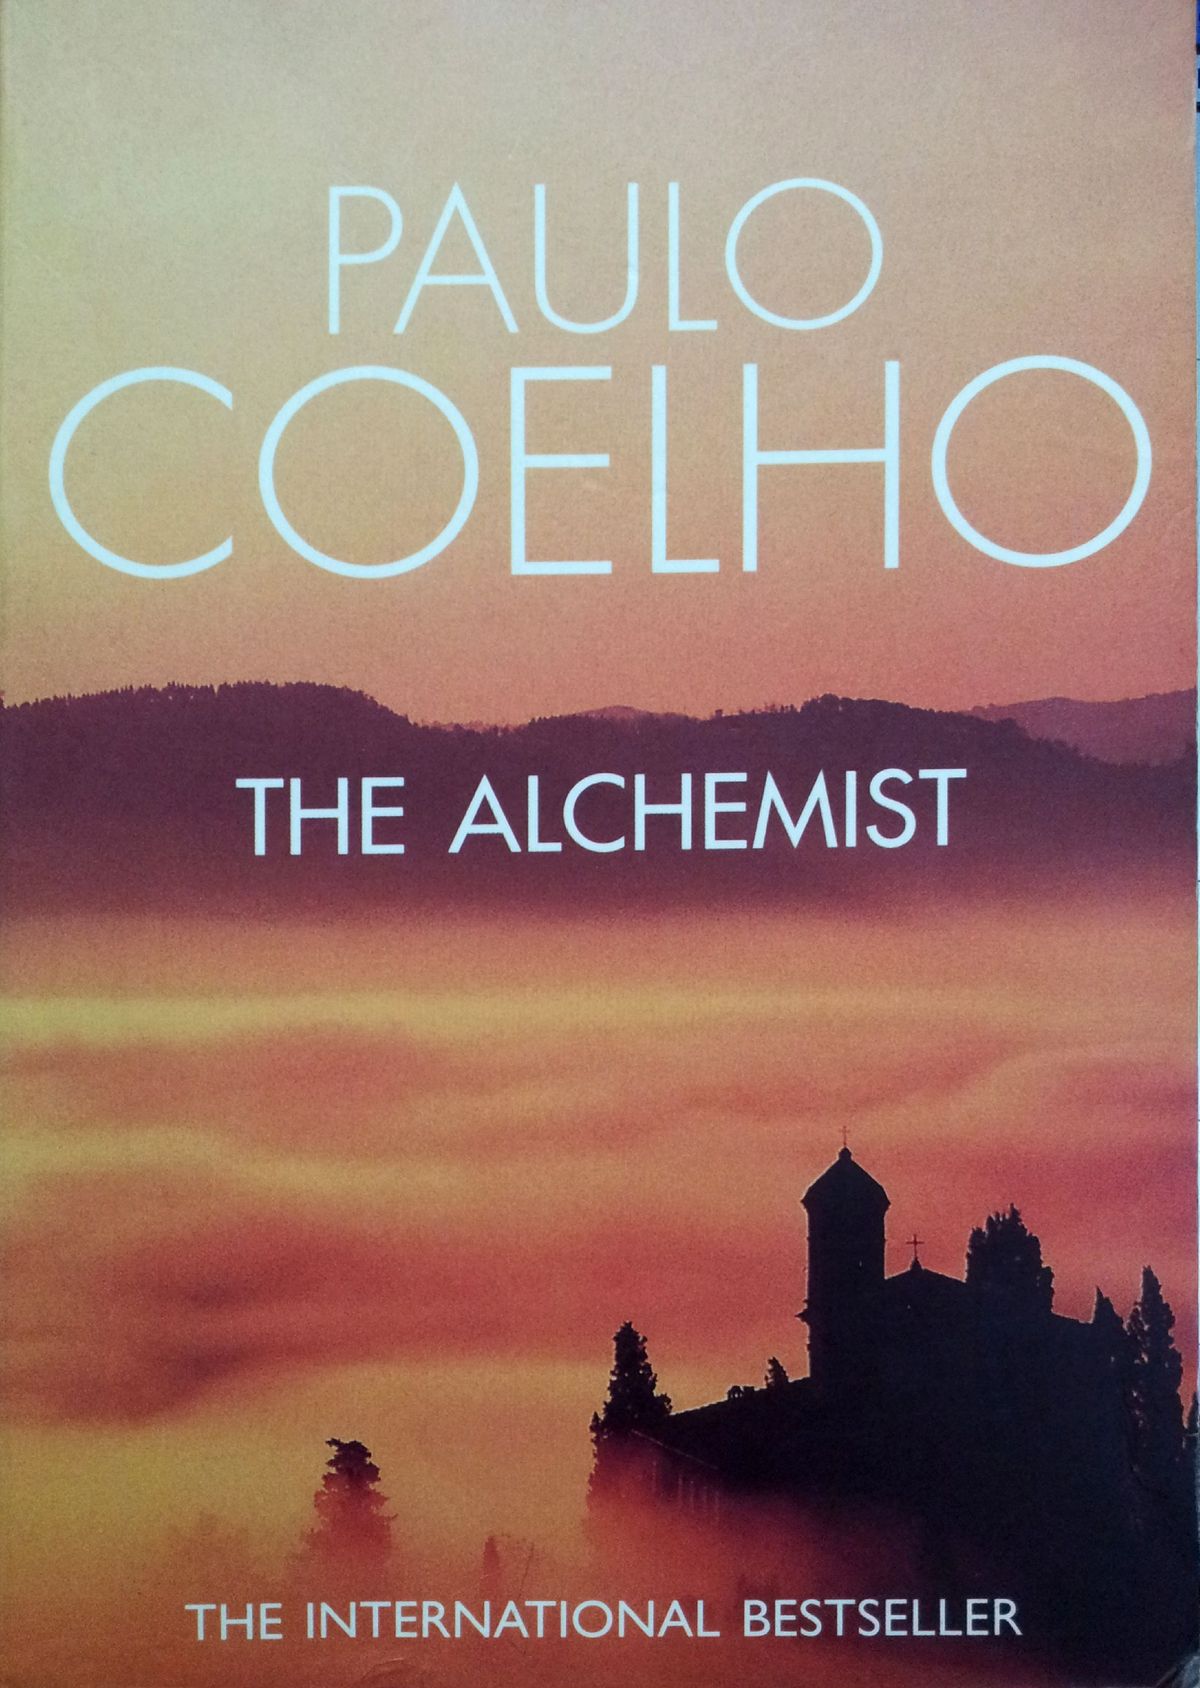 Why Everyone Needs To Read "The Alchemist" By Paulo Coehlo